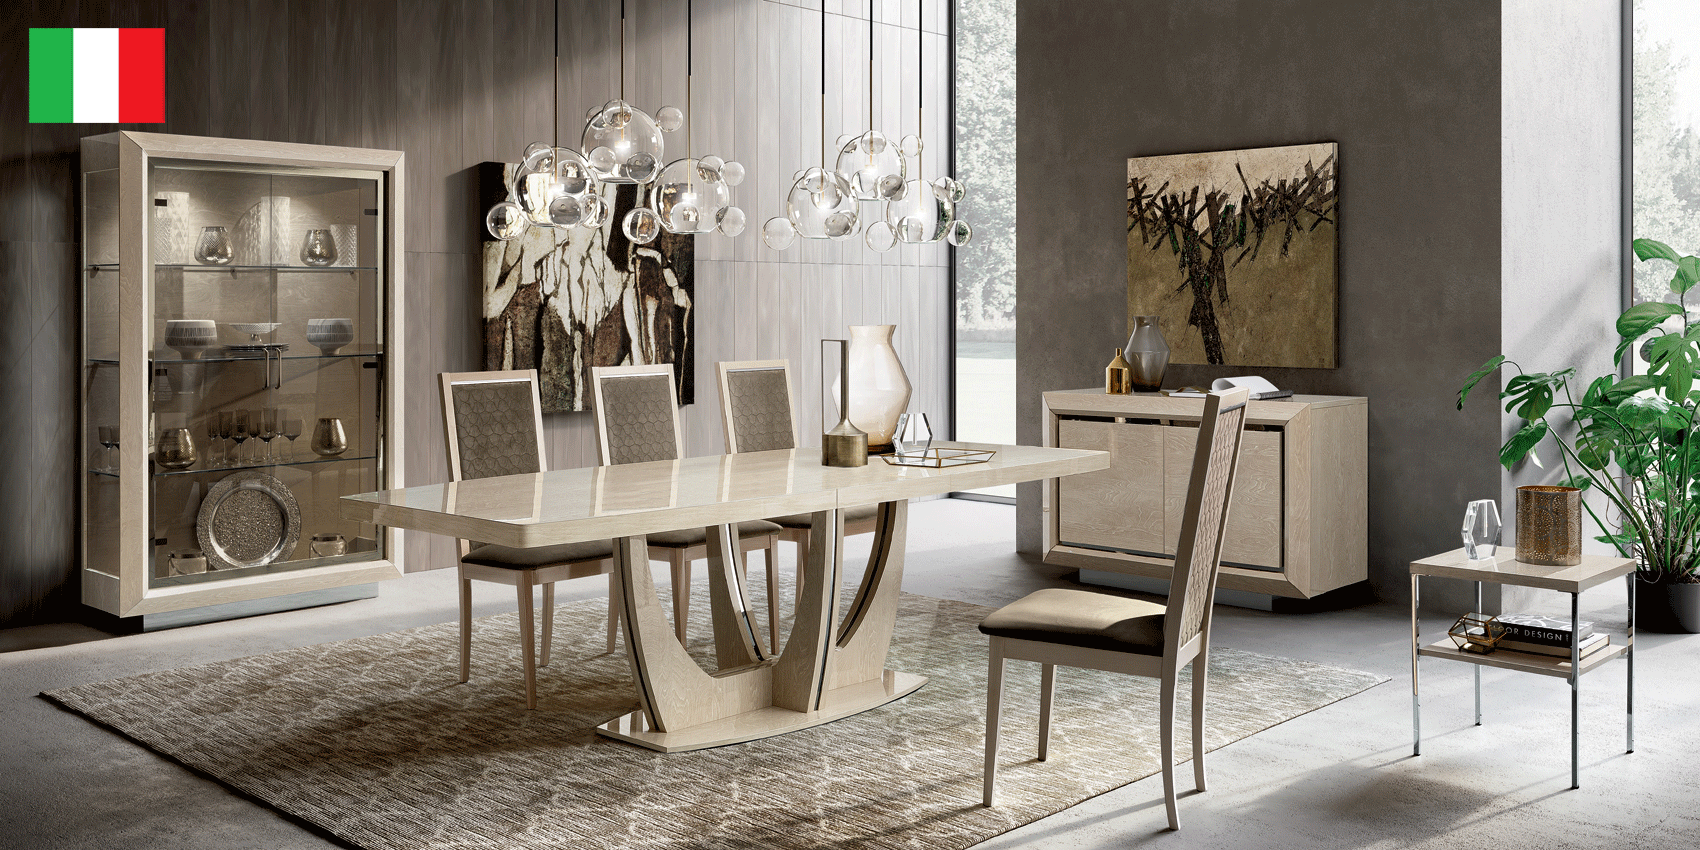 Dining Room Furniture Chairs Elite Dining Ivory with Ambra “Rombi” Chairs